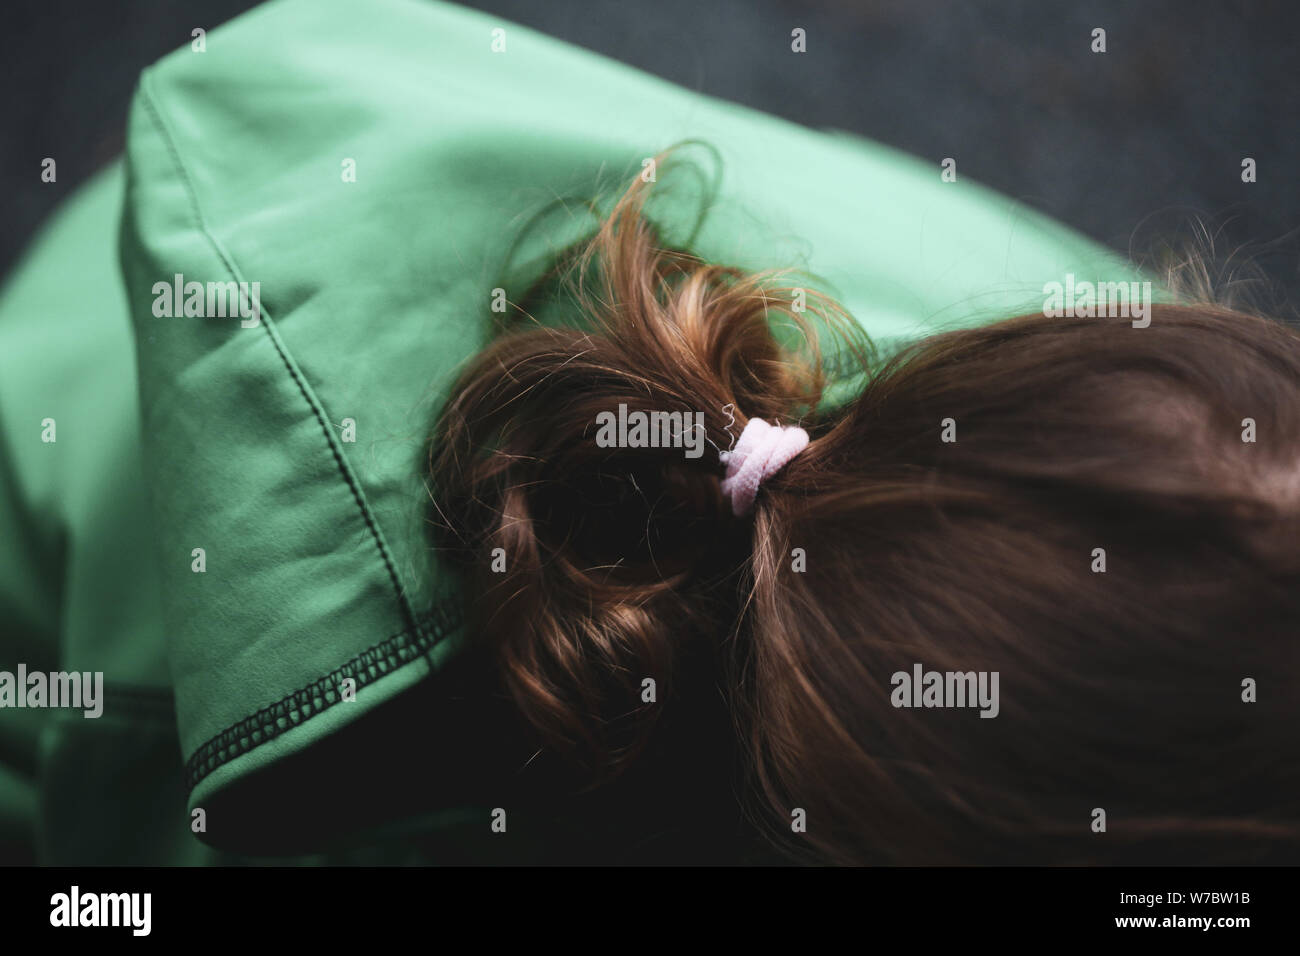 Details with the hair and scrunchie of a little girl dressed with a hoodie during a rainy day Stock Photo